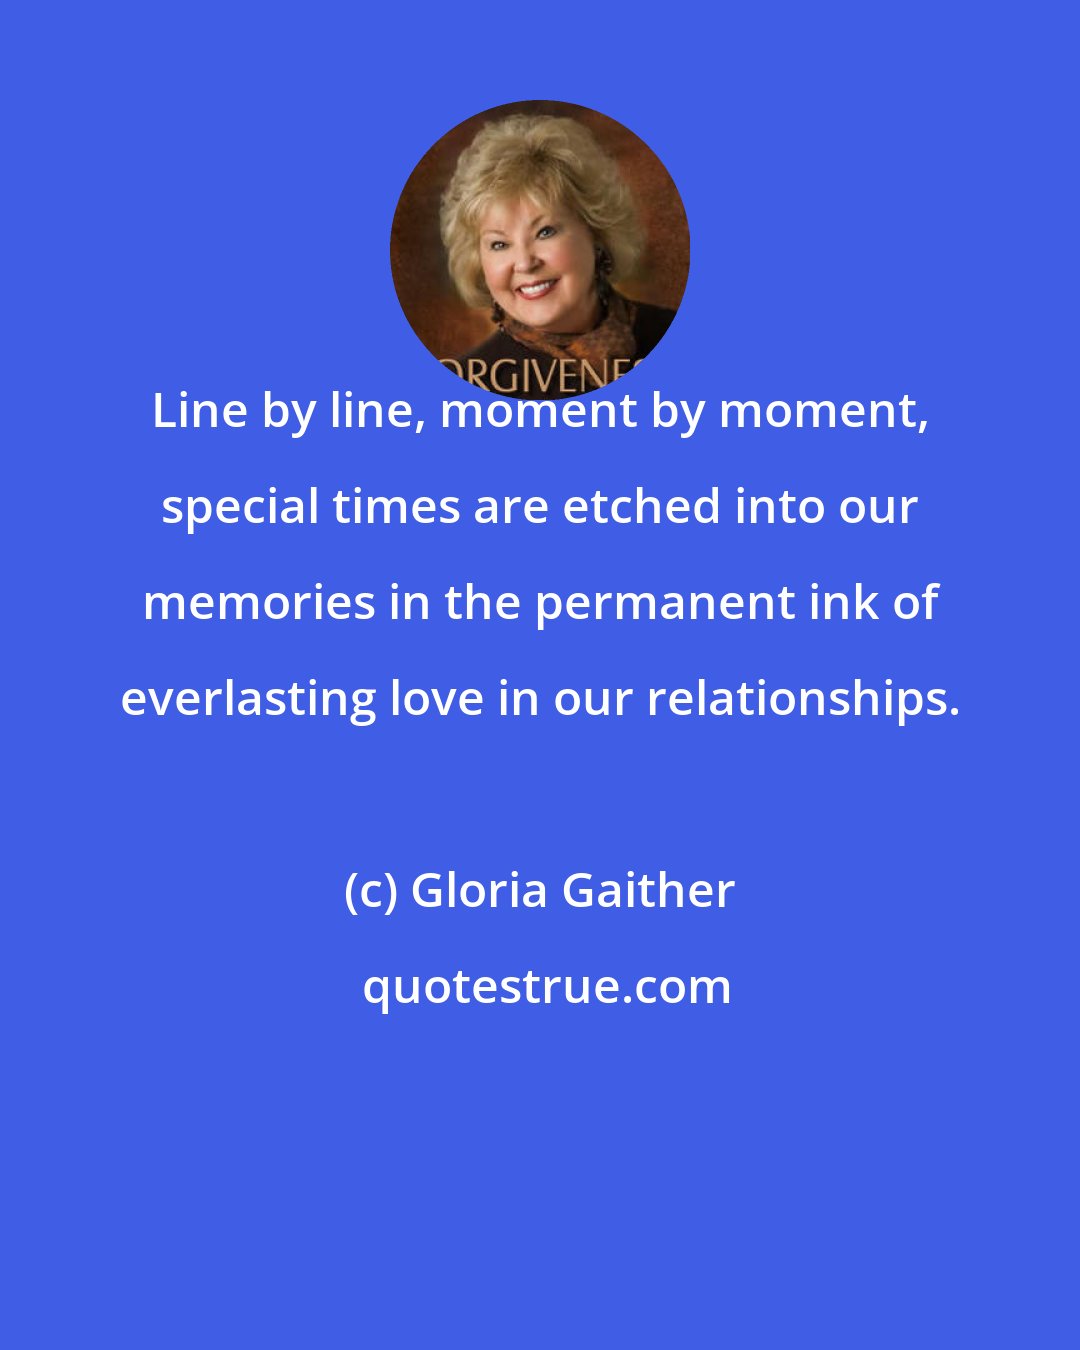 Gloria Gaither: Line by line, moment by moment, special times are etched into our memories in the permanent ink of everlasting love in our relationships.